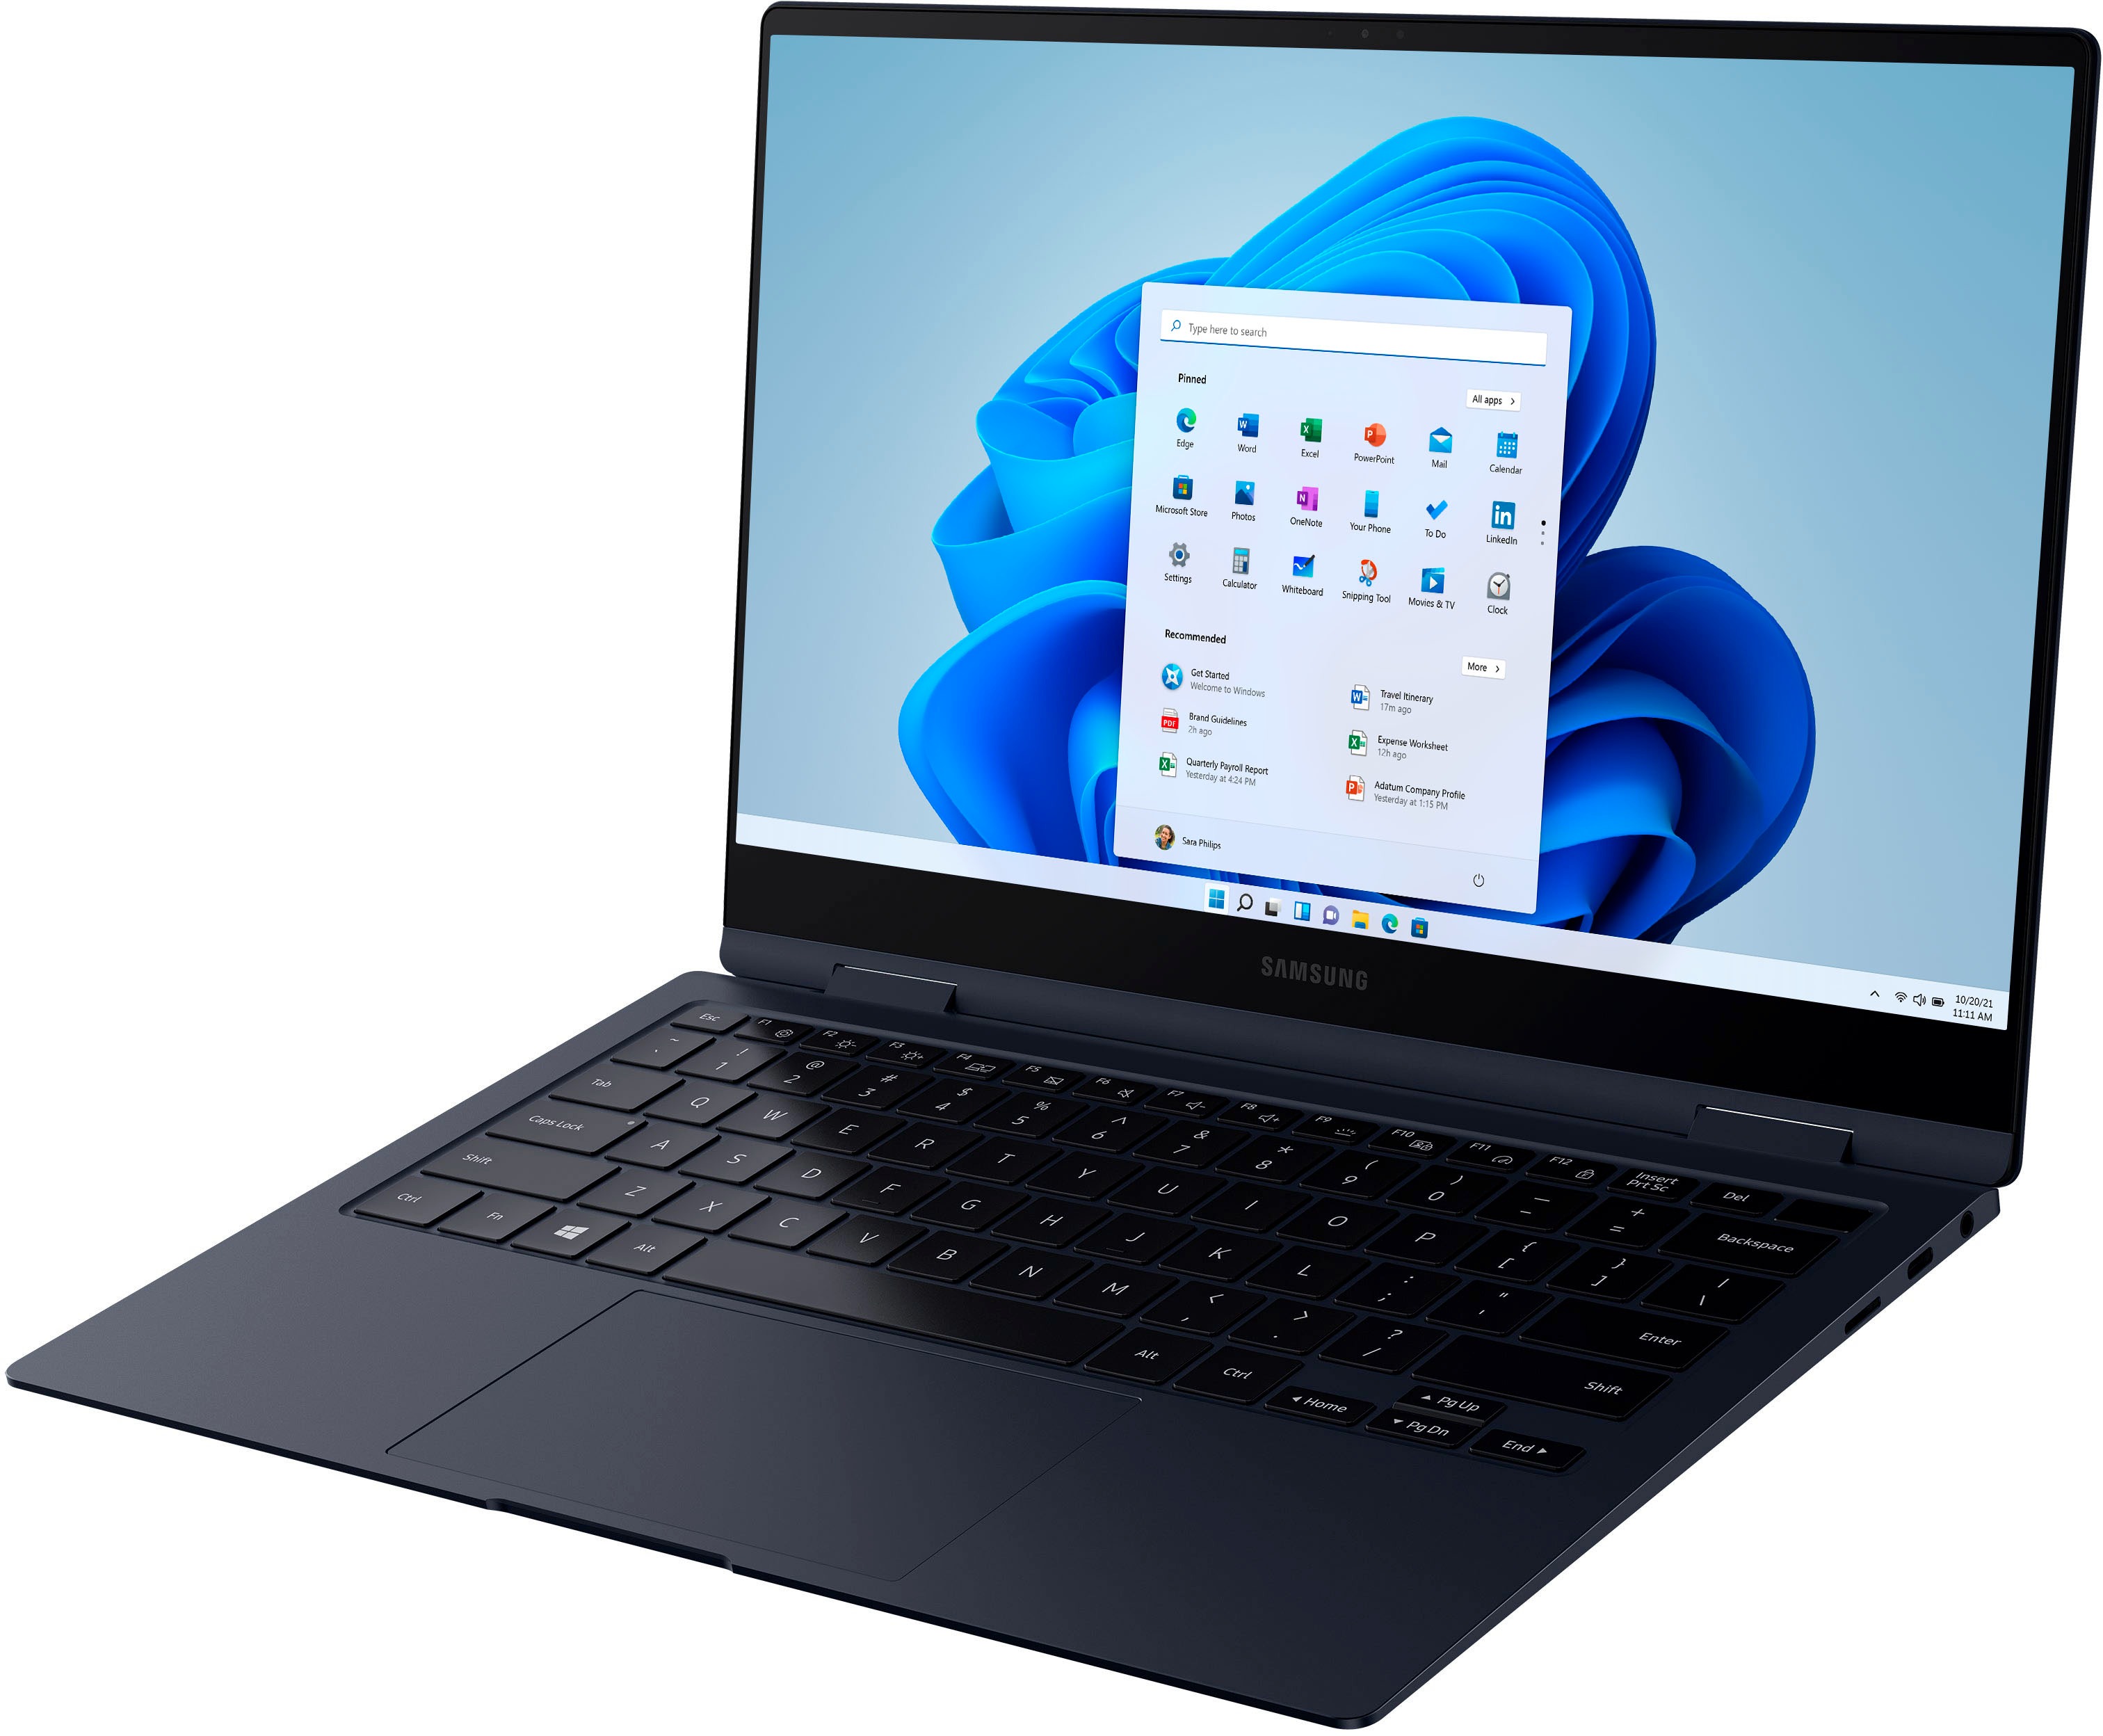 Samsung Galaxy Book Pro 360: 13.3" FHD OLED Touch, i7-1165G7, 16GB LPDDR4X, 512GB PCIe SSD, Thunderbolt 4, S-pen, Win10H @ $900 + F/S at Best Buy